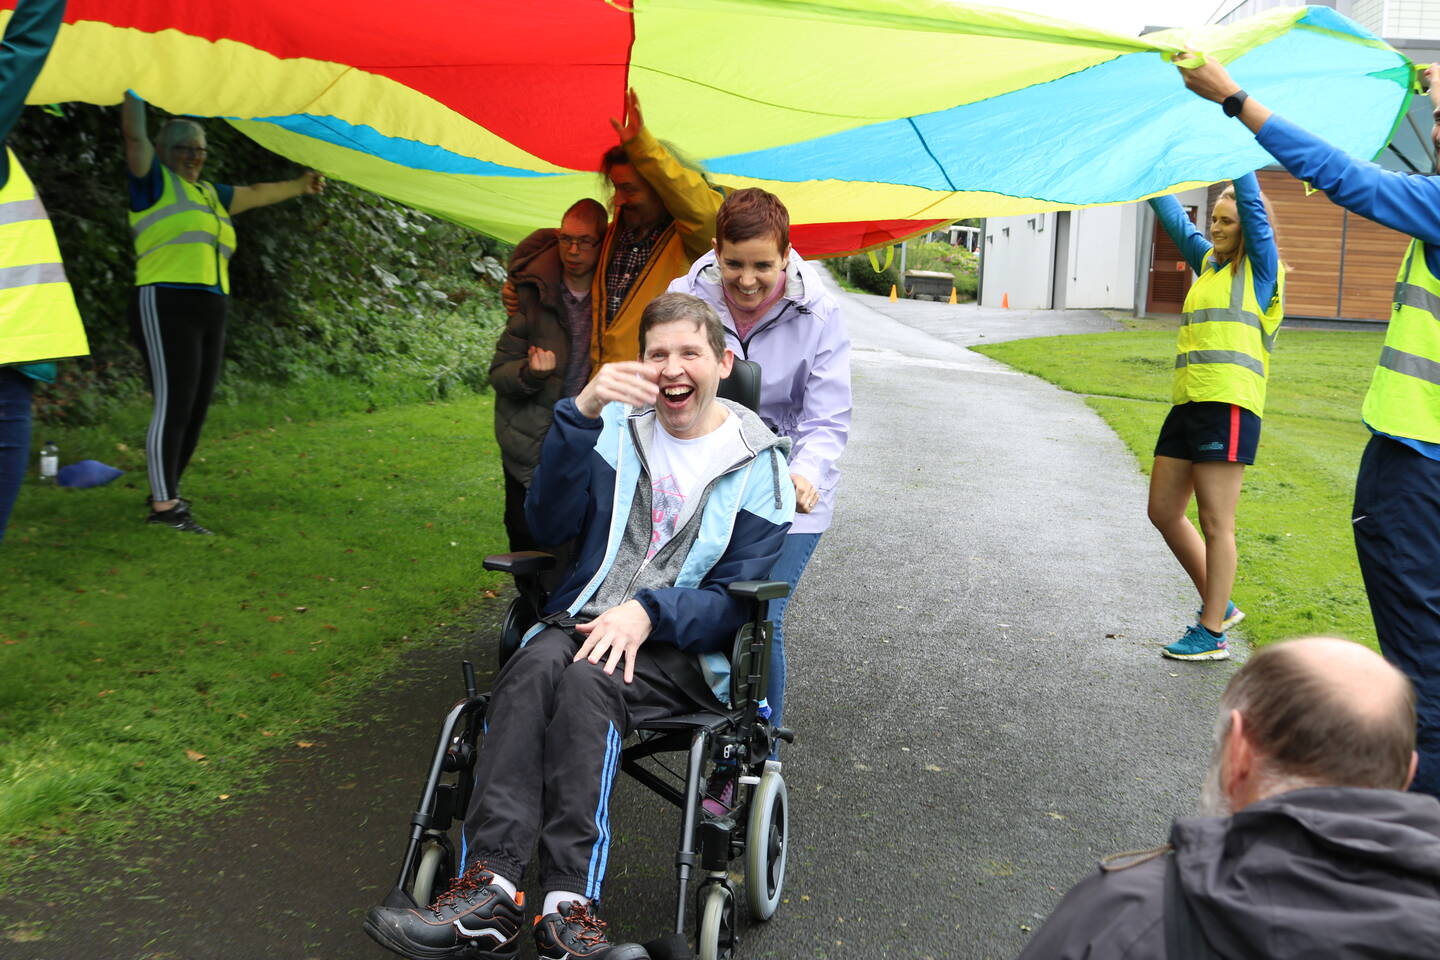 Wheelchair user smiling and laughing while going under a colourful parachute held up by volunteers 